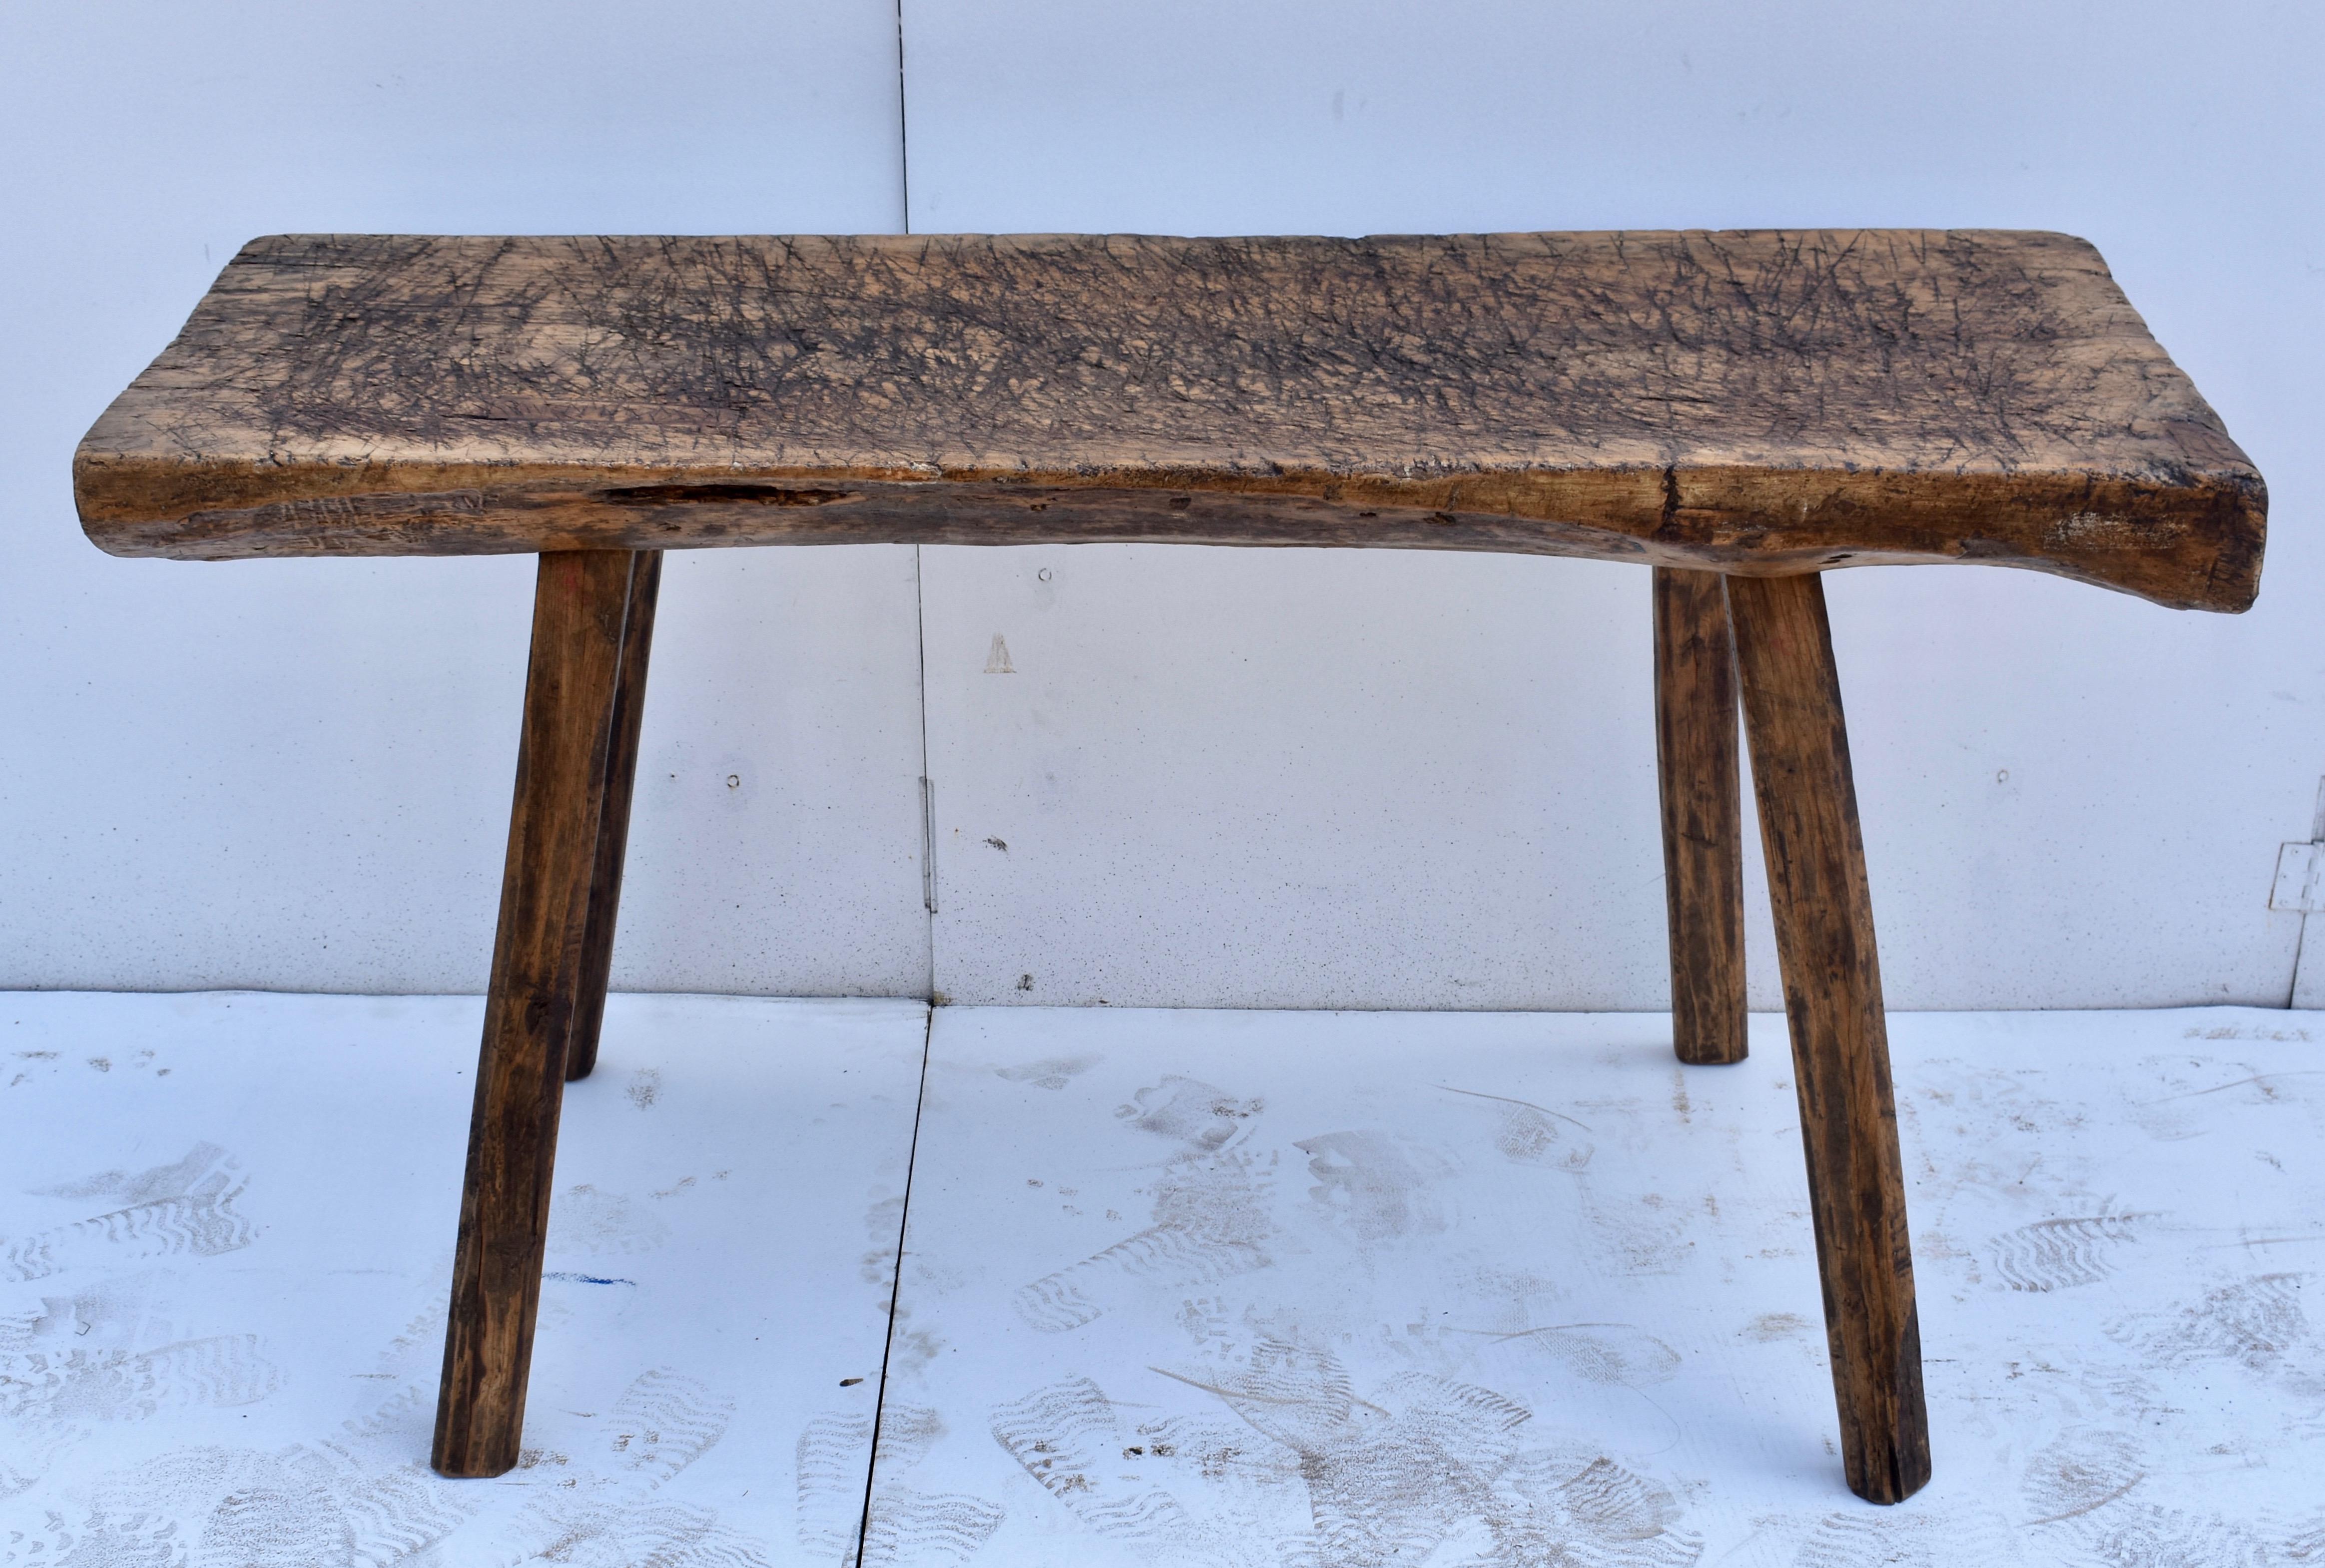 The top of this oak pig bench is a single slab of oak almost 4” thick and it still retains the rounded underside of the log from which it was hewn. It is criss-crossed, chopped and gnarled and even cupped a little through decades of purposeful use.